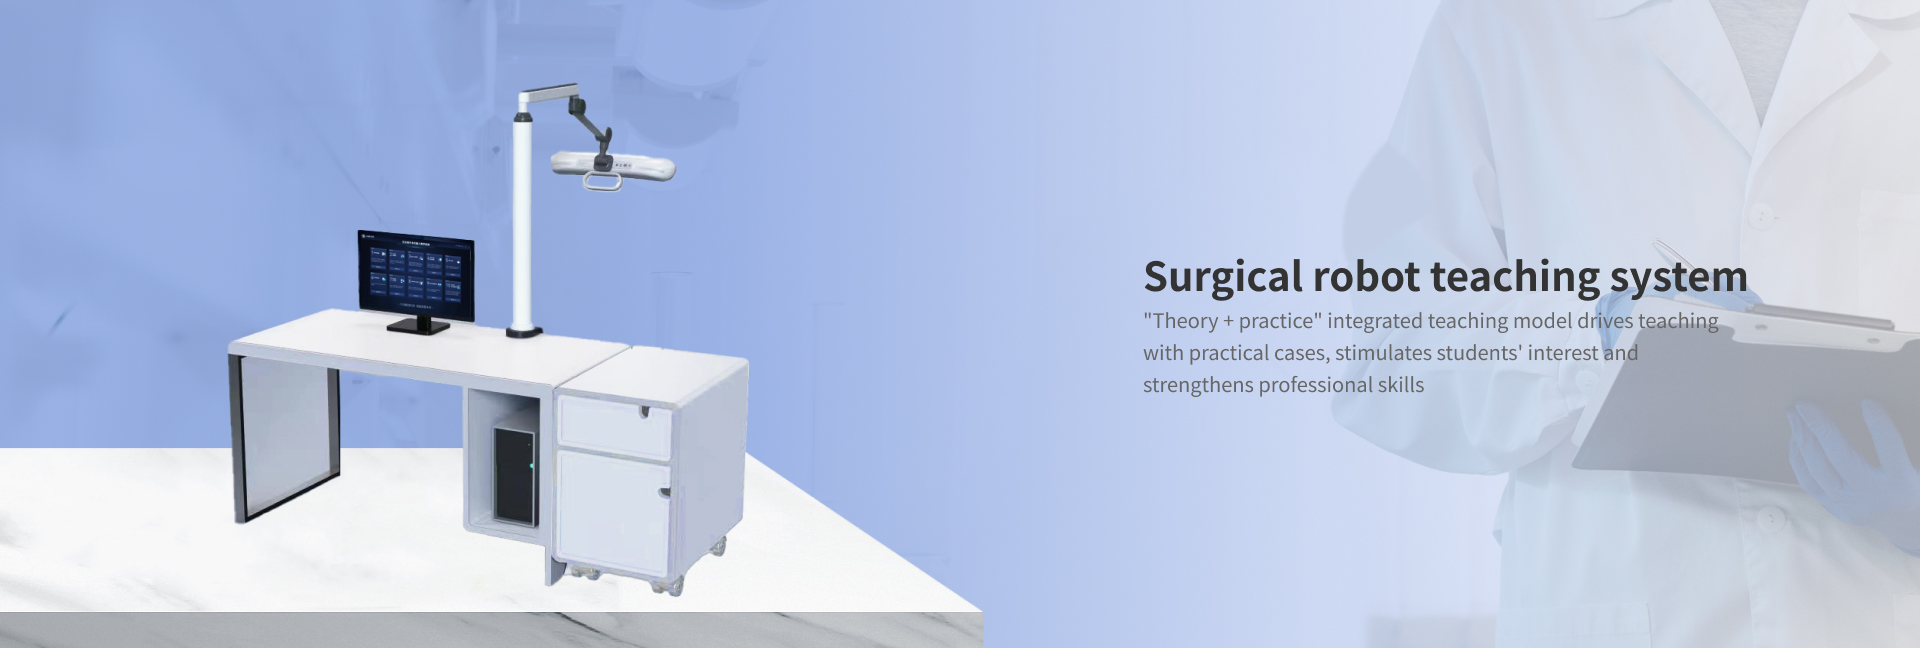 Surgical robot teaching system